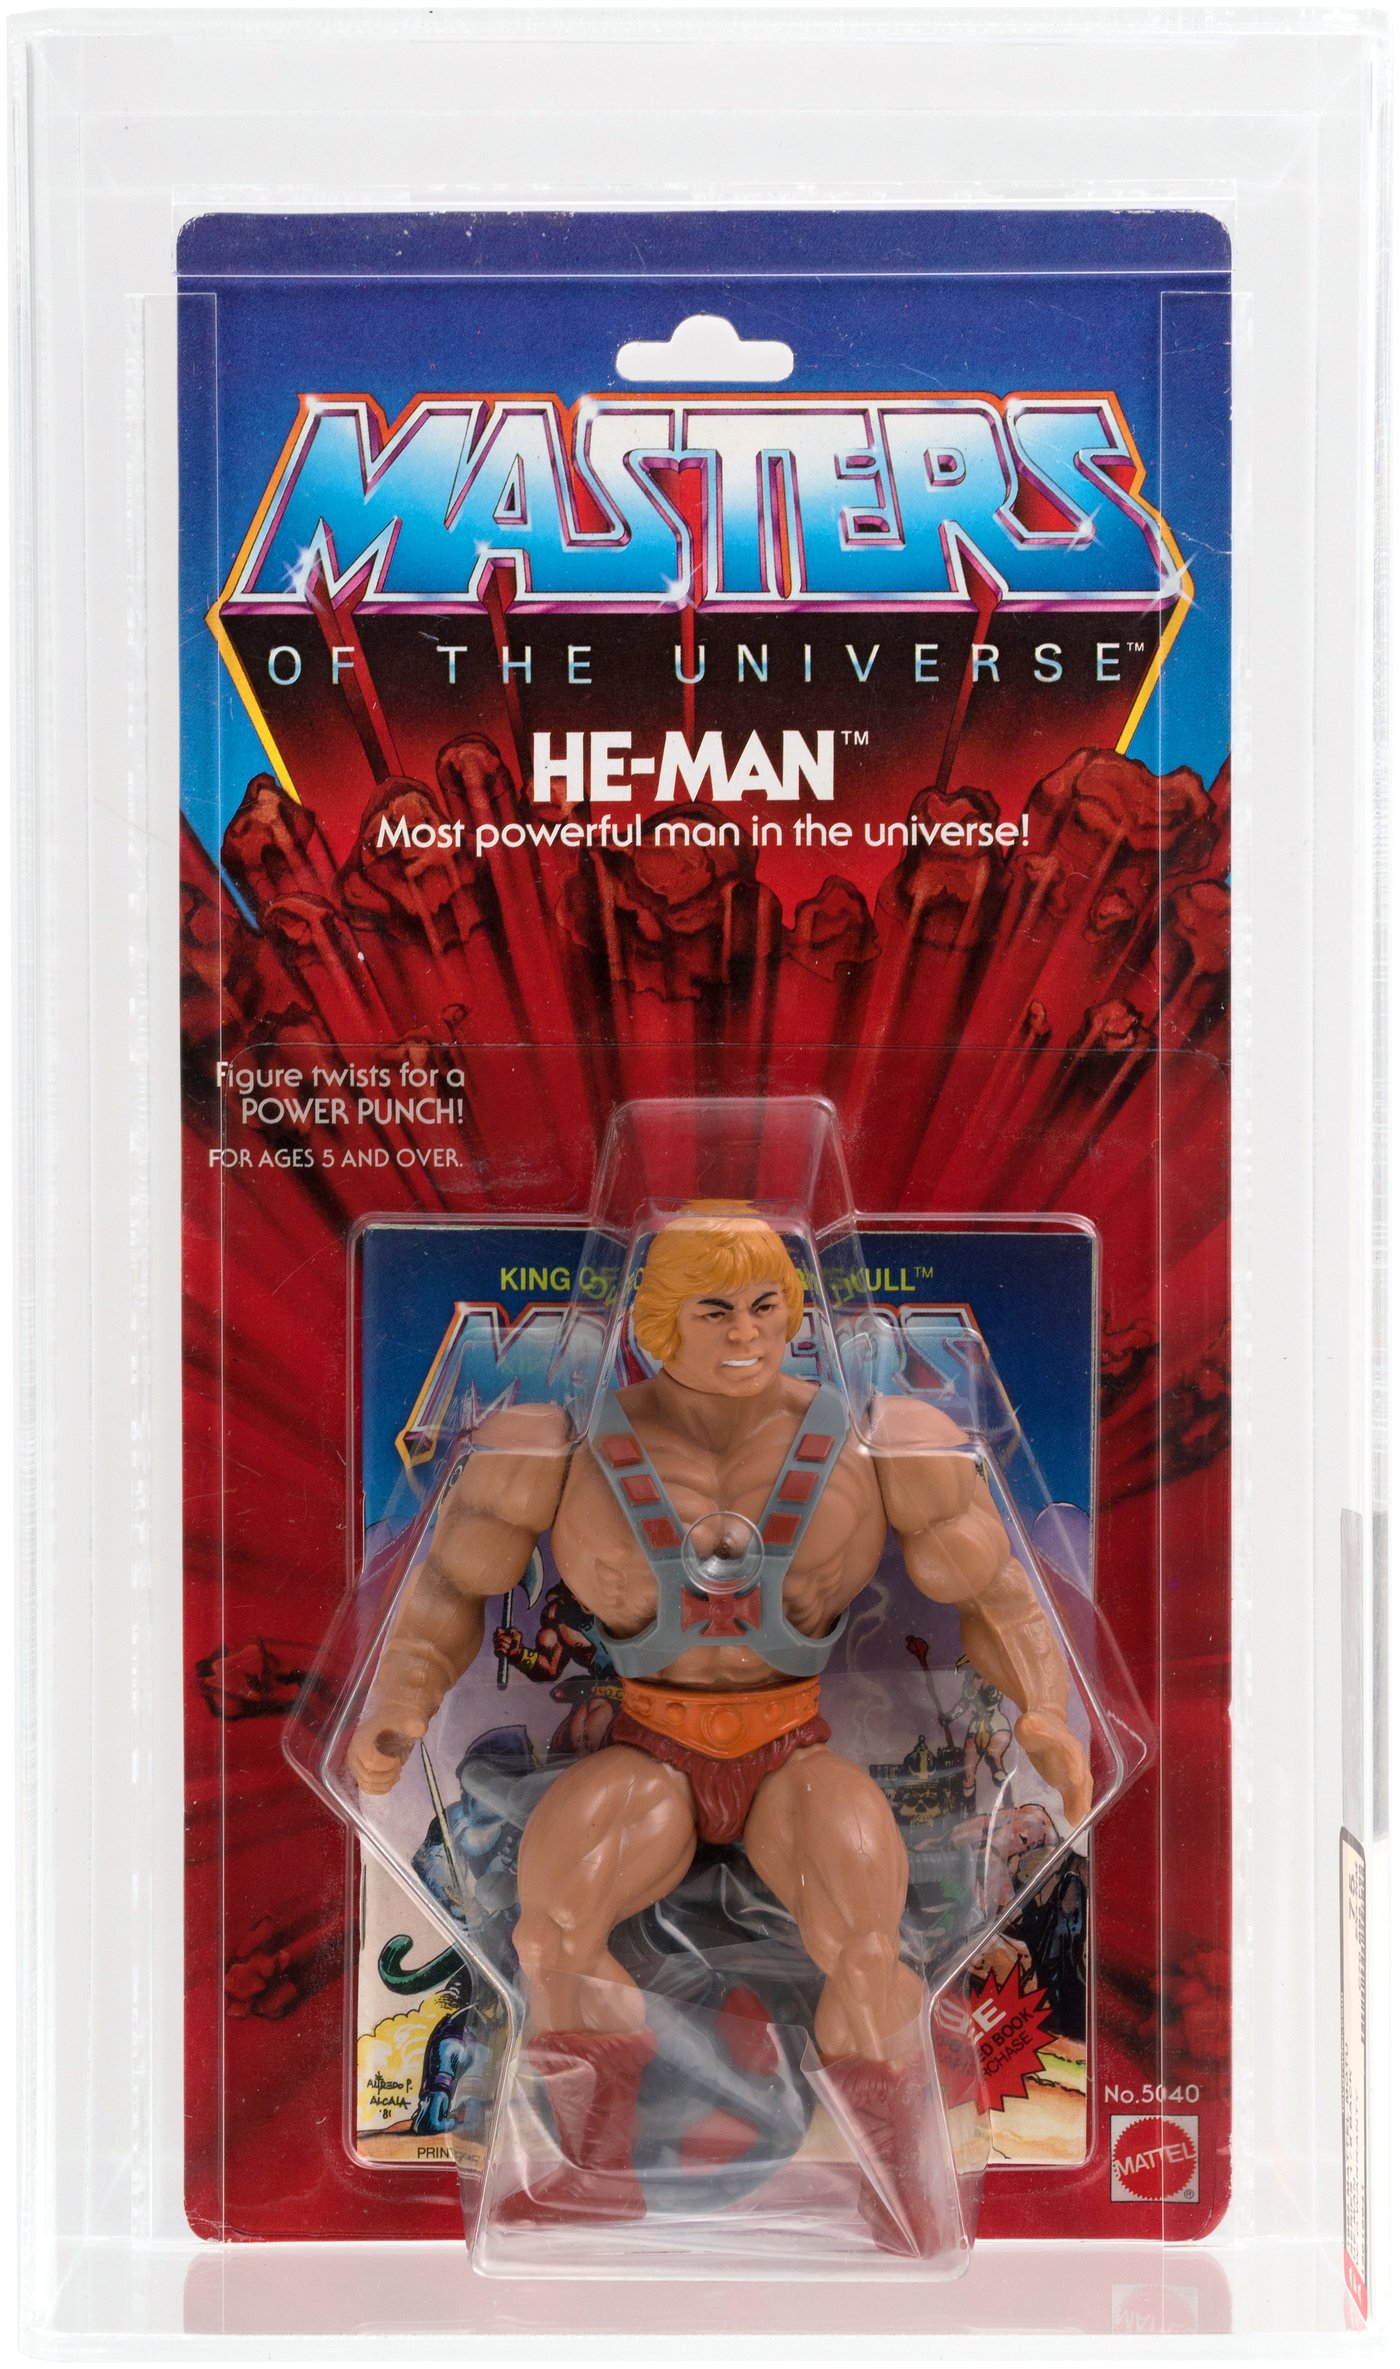 M-213* CELEBRITY-MASTERS OF THE UNIVERSE-HE-MAN--4"X6"- 